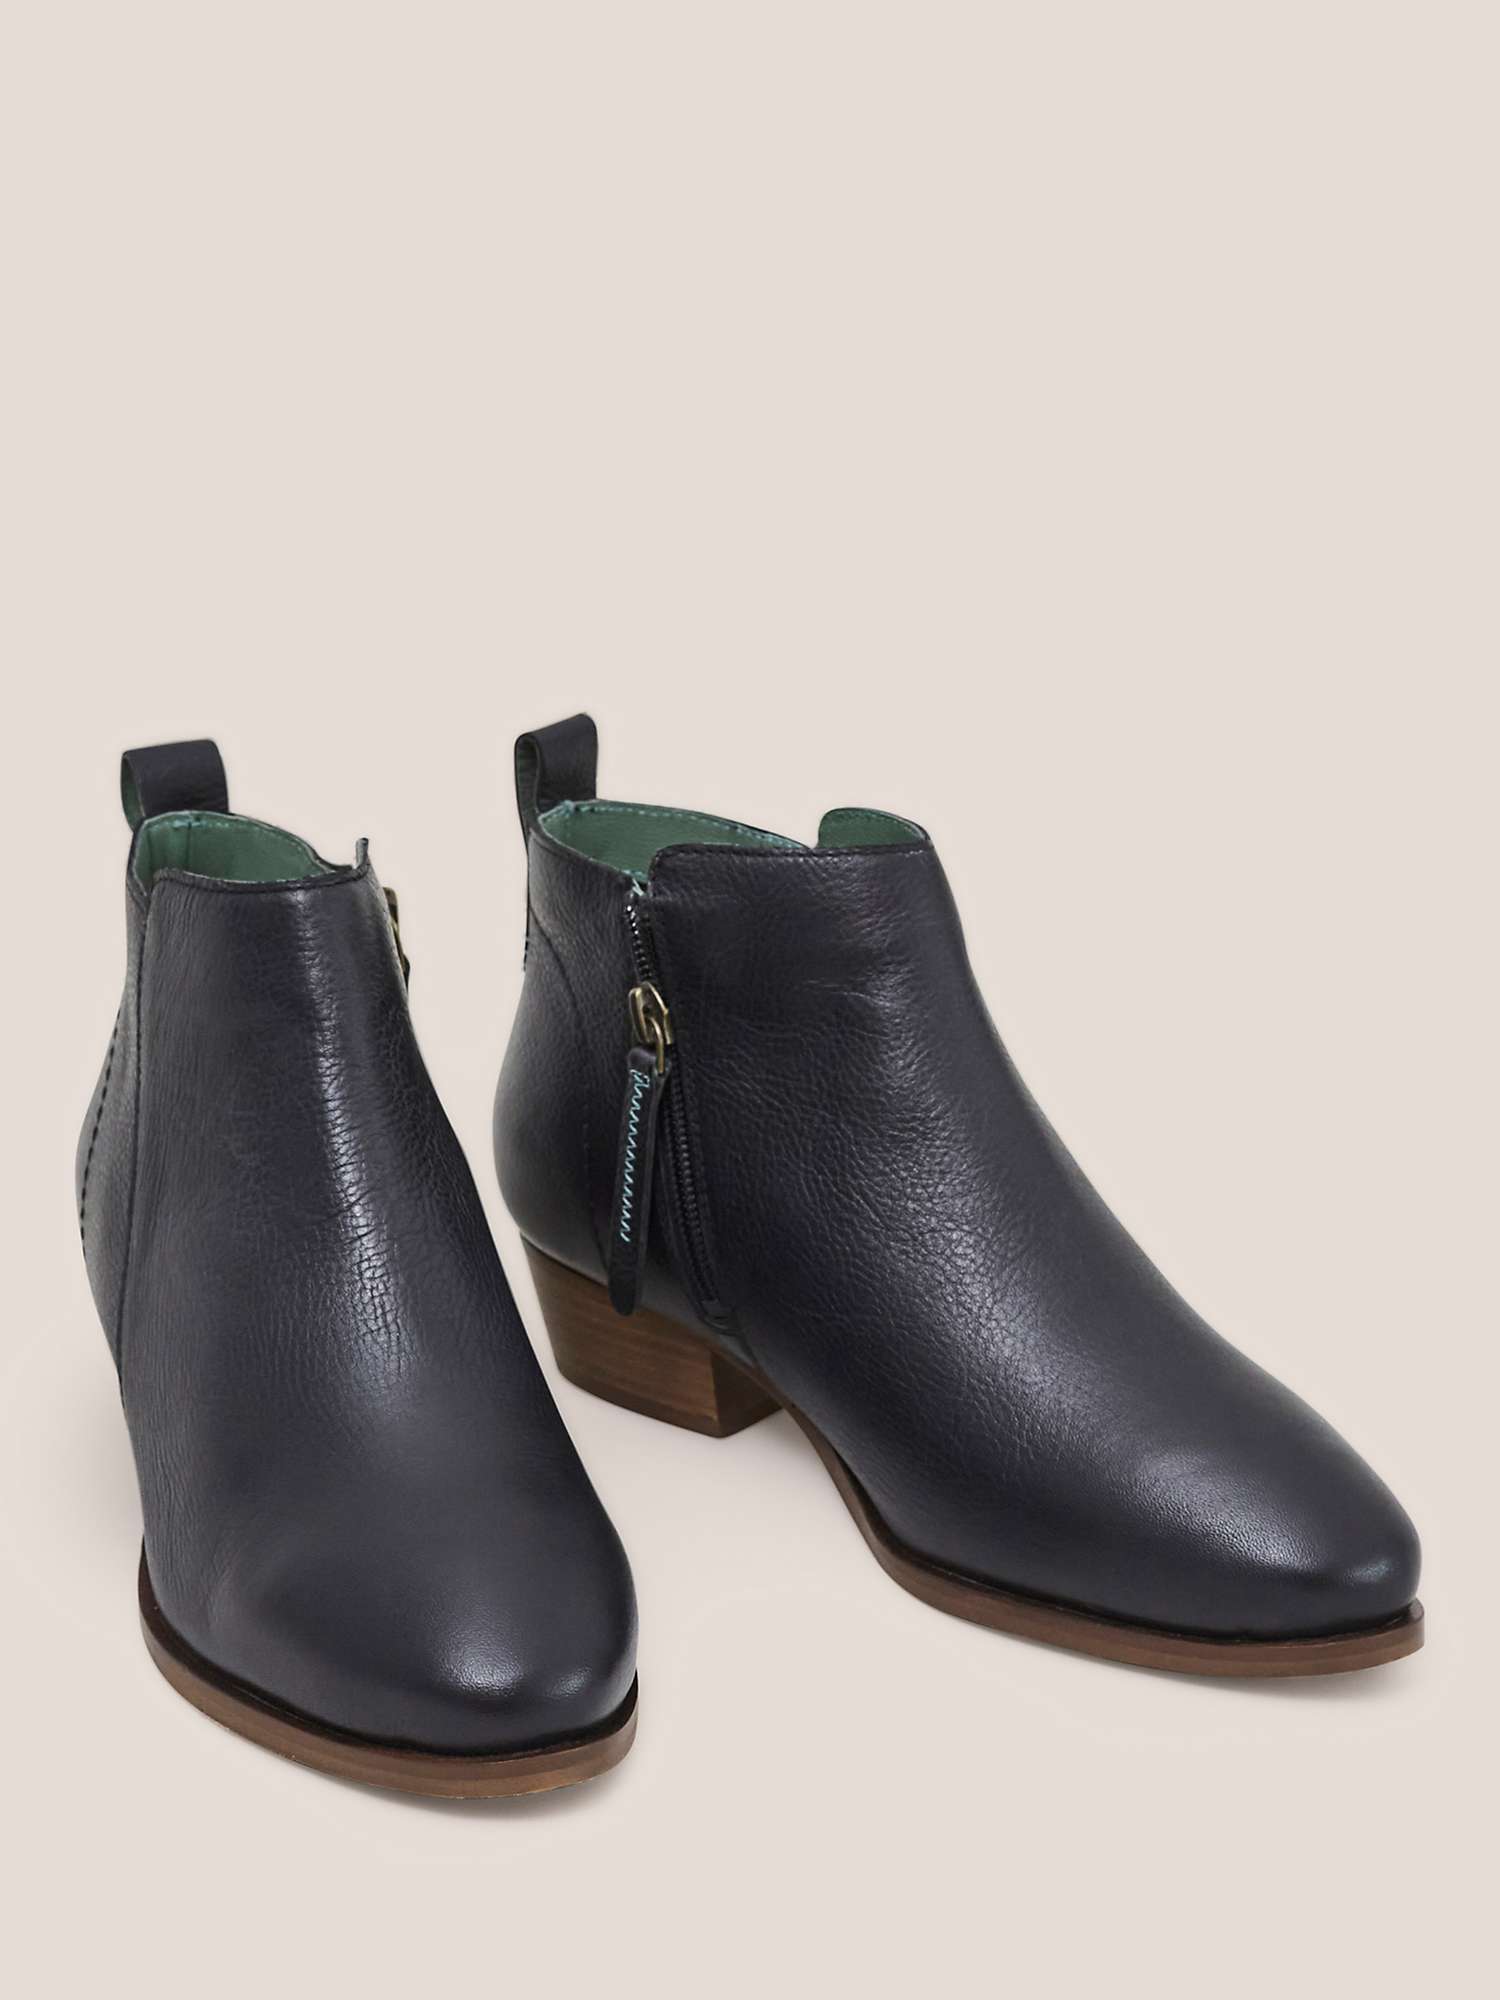 Buy White Stuff Leather Ankle Boots, Black Online at johnlewis.com